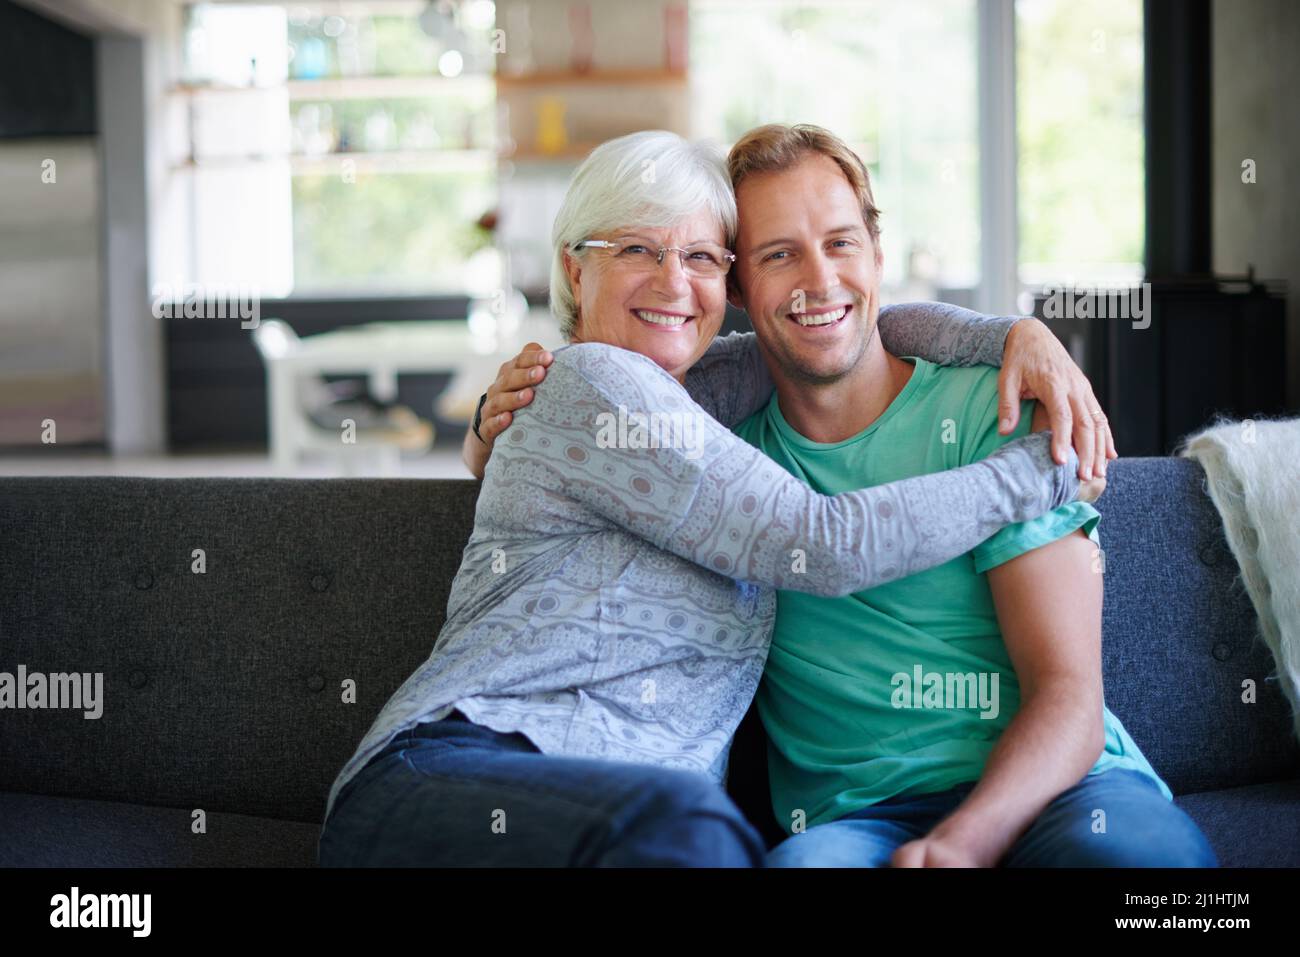 I love having him offer. Portrait of a senior woman embracing her son while sitting on the sofa at home. Stock Photo